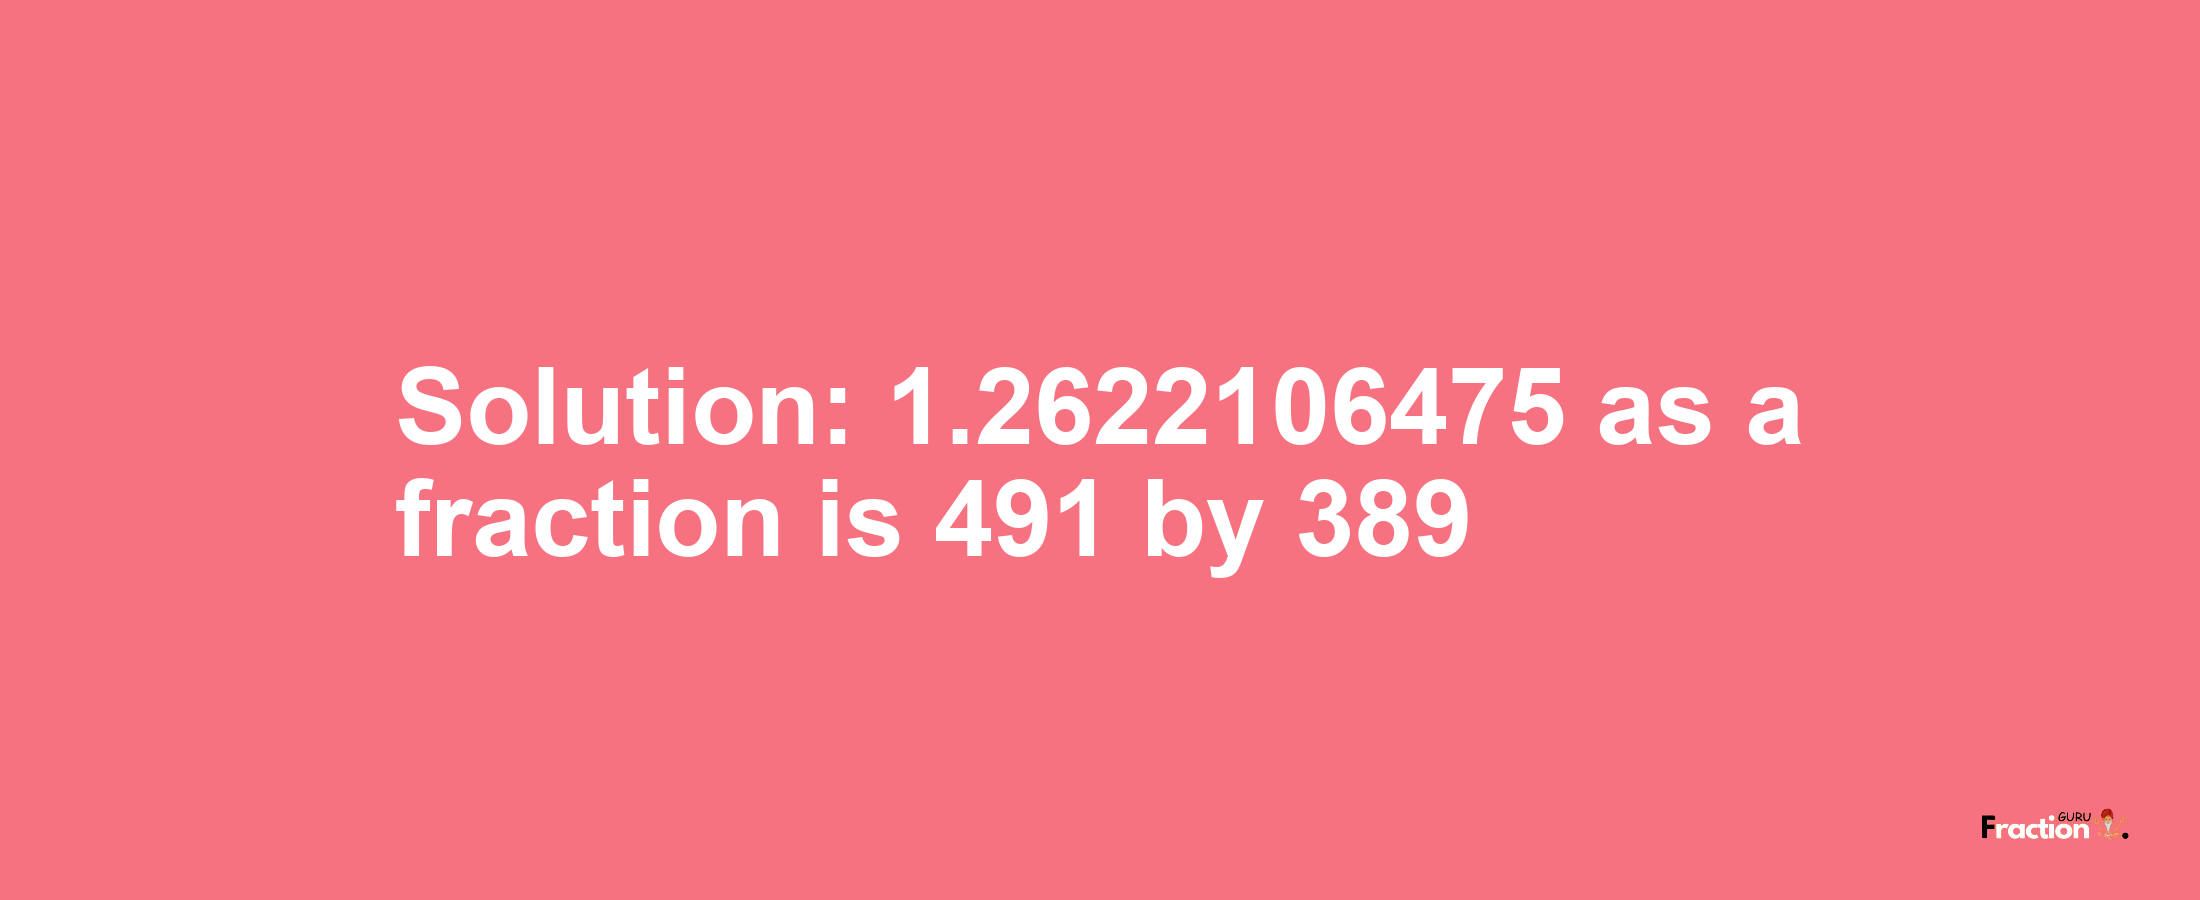 Solution:1.2622106475 as a fraction is 491/389